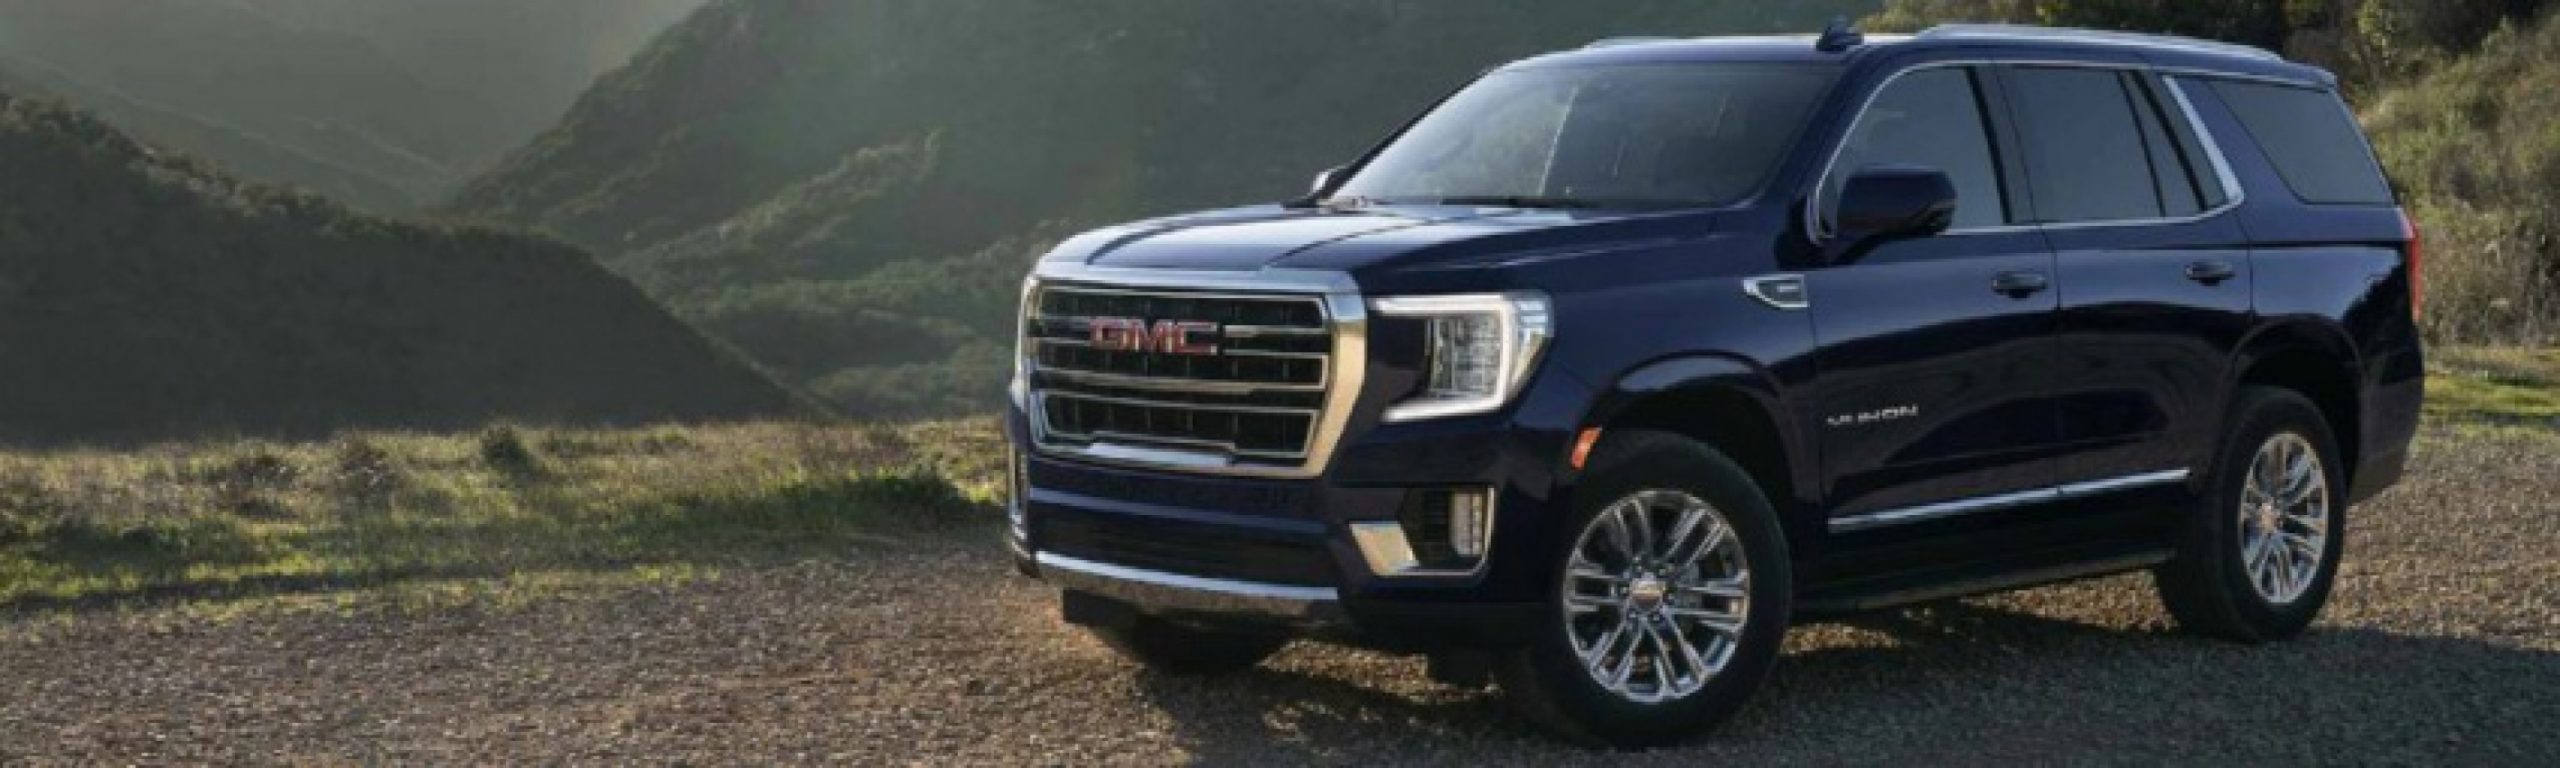 autos, cars, ford, gmc, expedition, ford expedition, gmc yukon, yukon xl, should you buy the 2022 gmc yukon xl or 2022 ford expedition max?